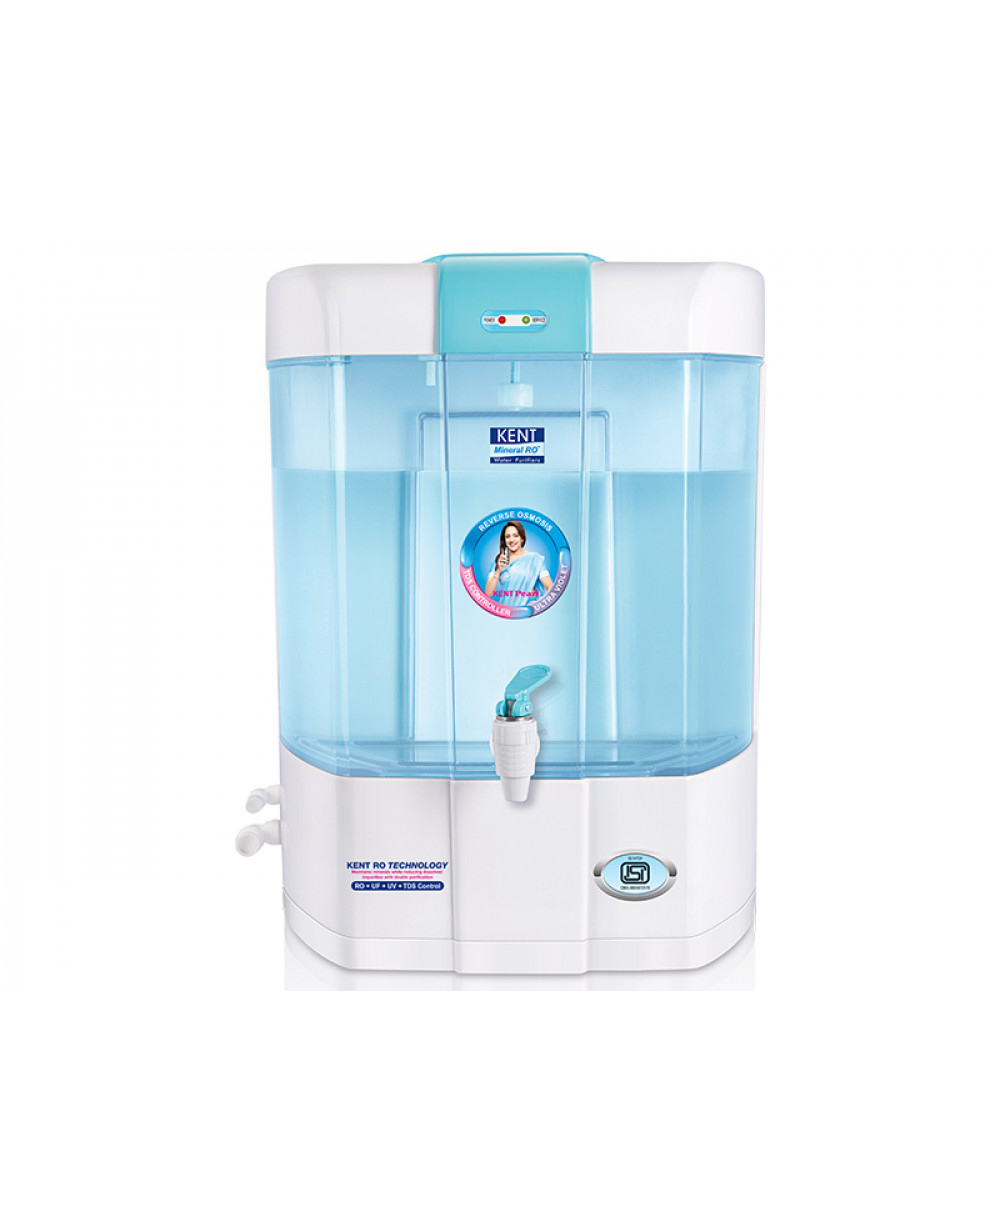 kent ro water purifier with cooler price